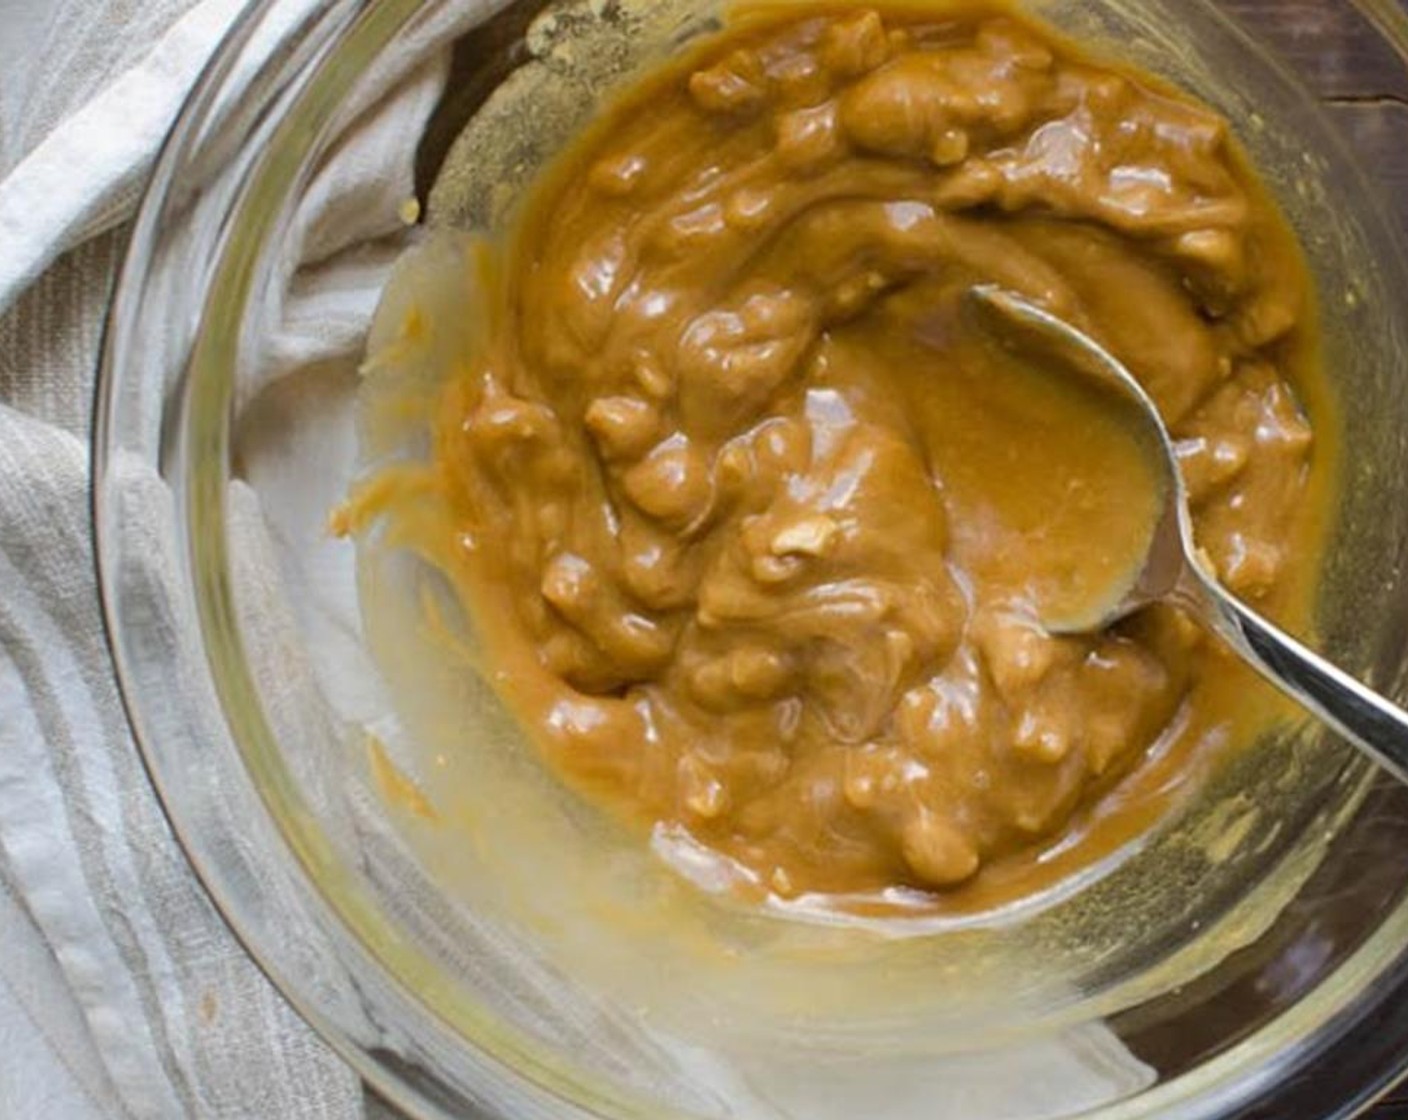 step 2 Add the Almond Butter (1/2 cup), Almond Extract (1 tsp), and Honey (3 Tbsp) to a small bowl. Microwave in 10 second bursts to soften the almond butter and make it easier to stir.